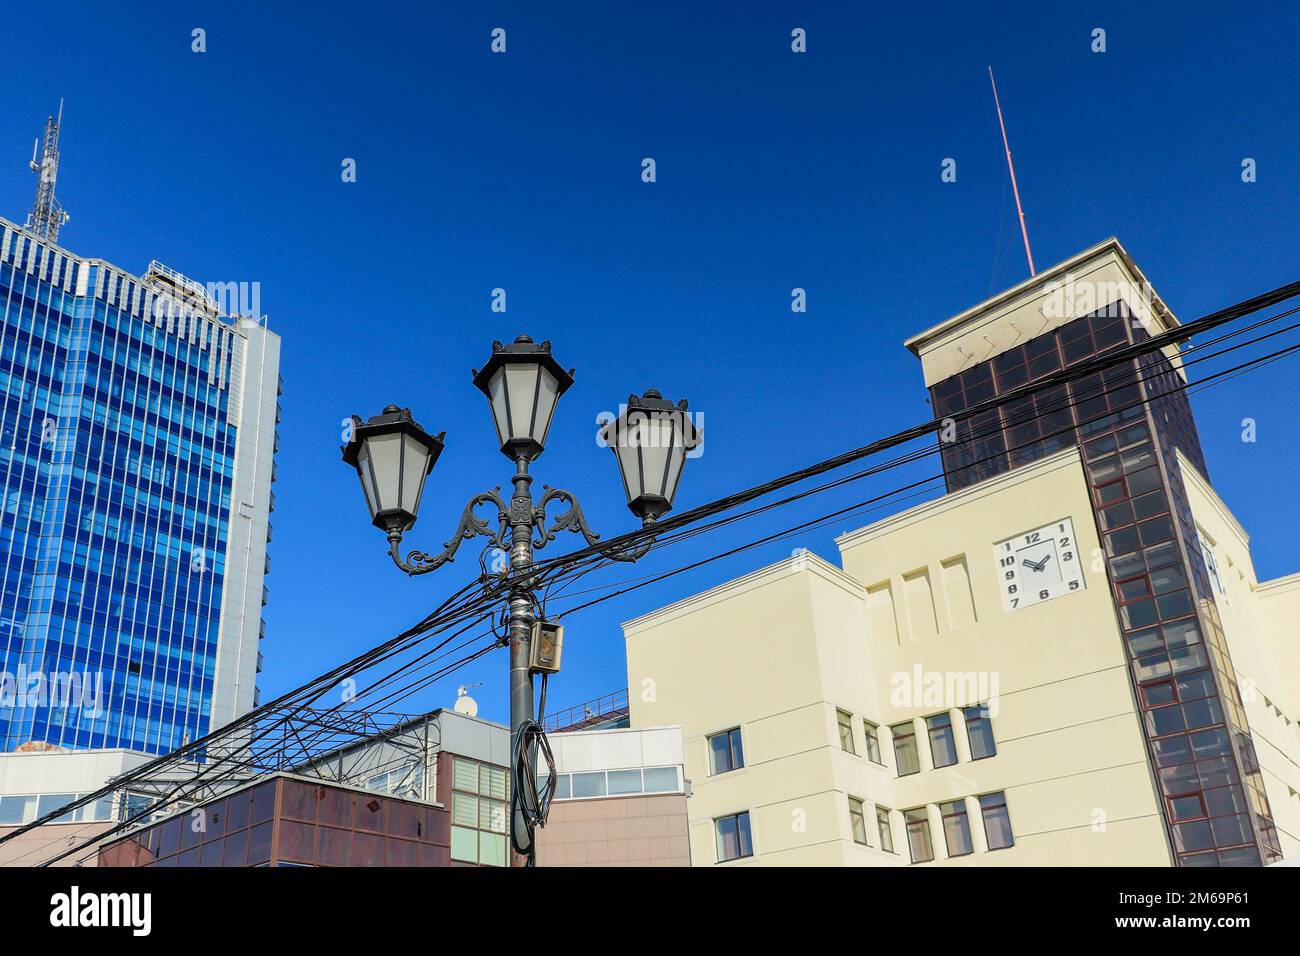 Lamppost on the background of buildings and the sky. The photo was taken in Chelyabinsk, Russia. Stock Photo